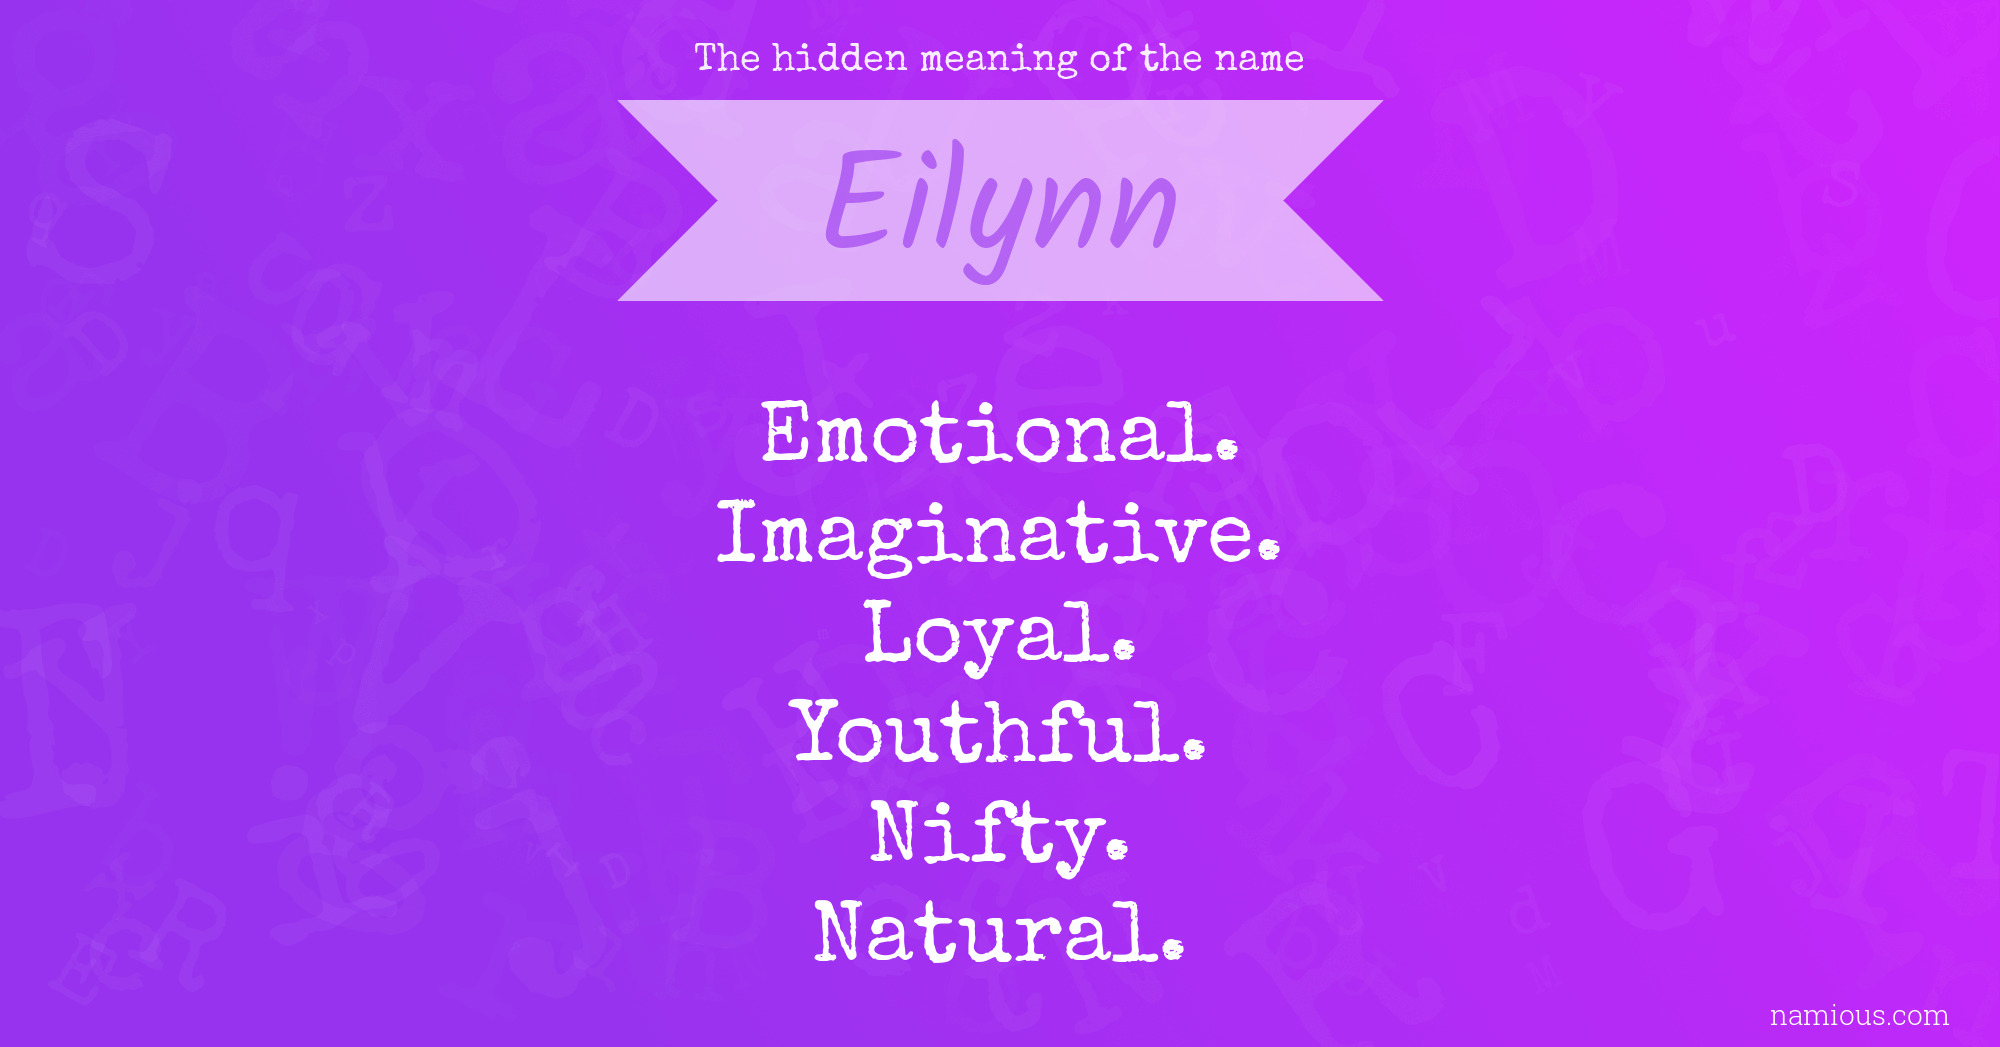 The hidden meaning of the name Eilynn